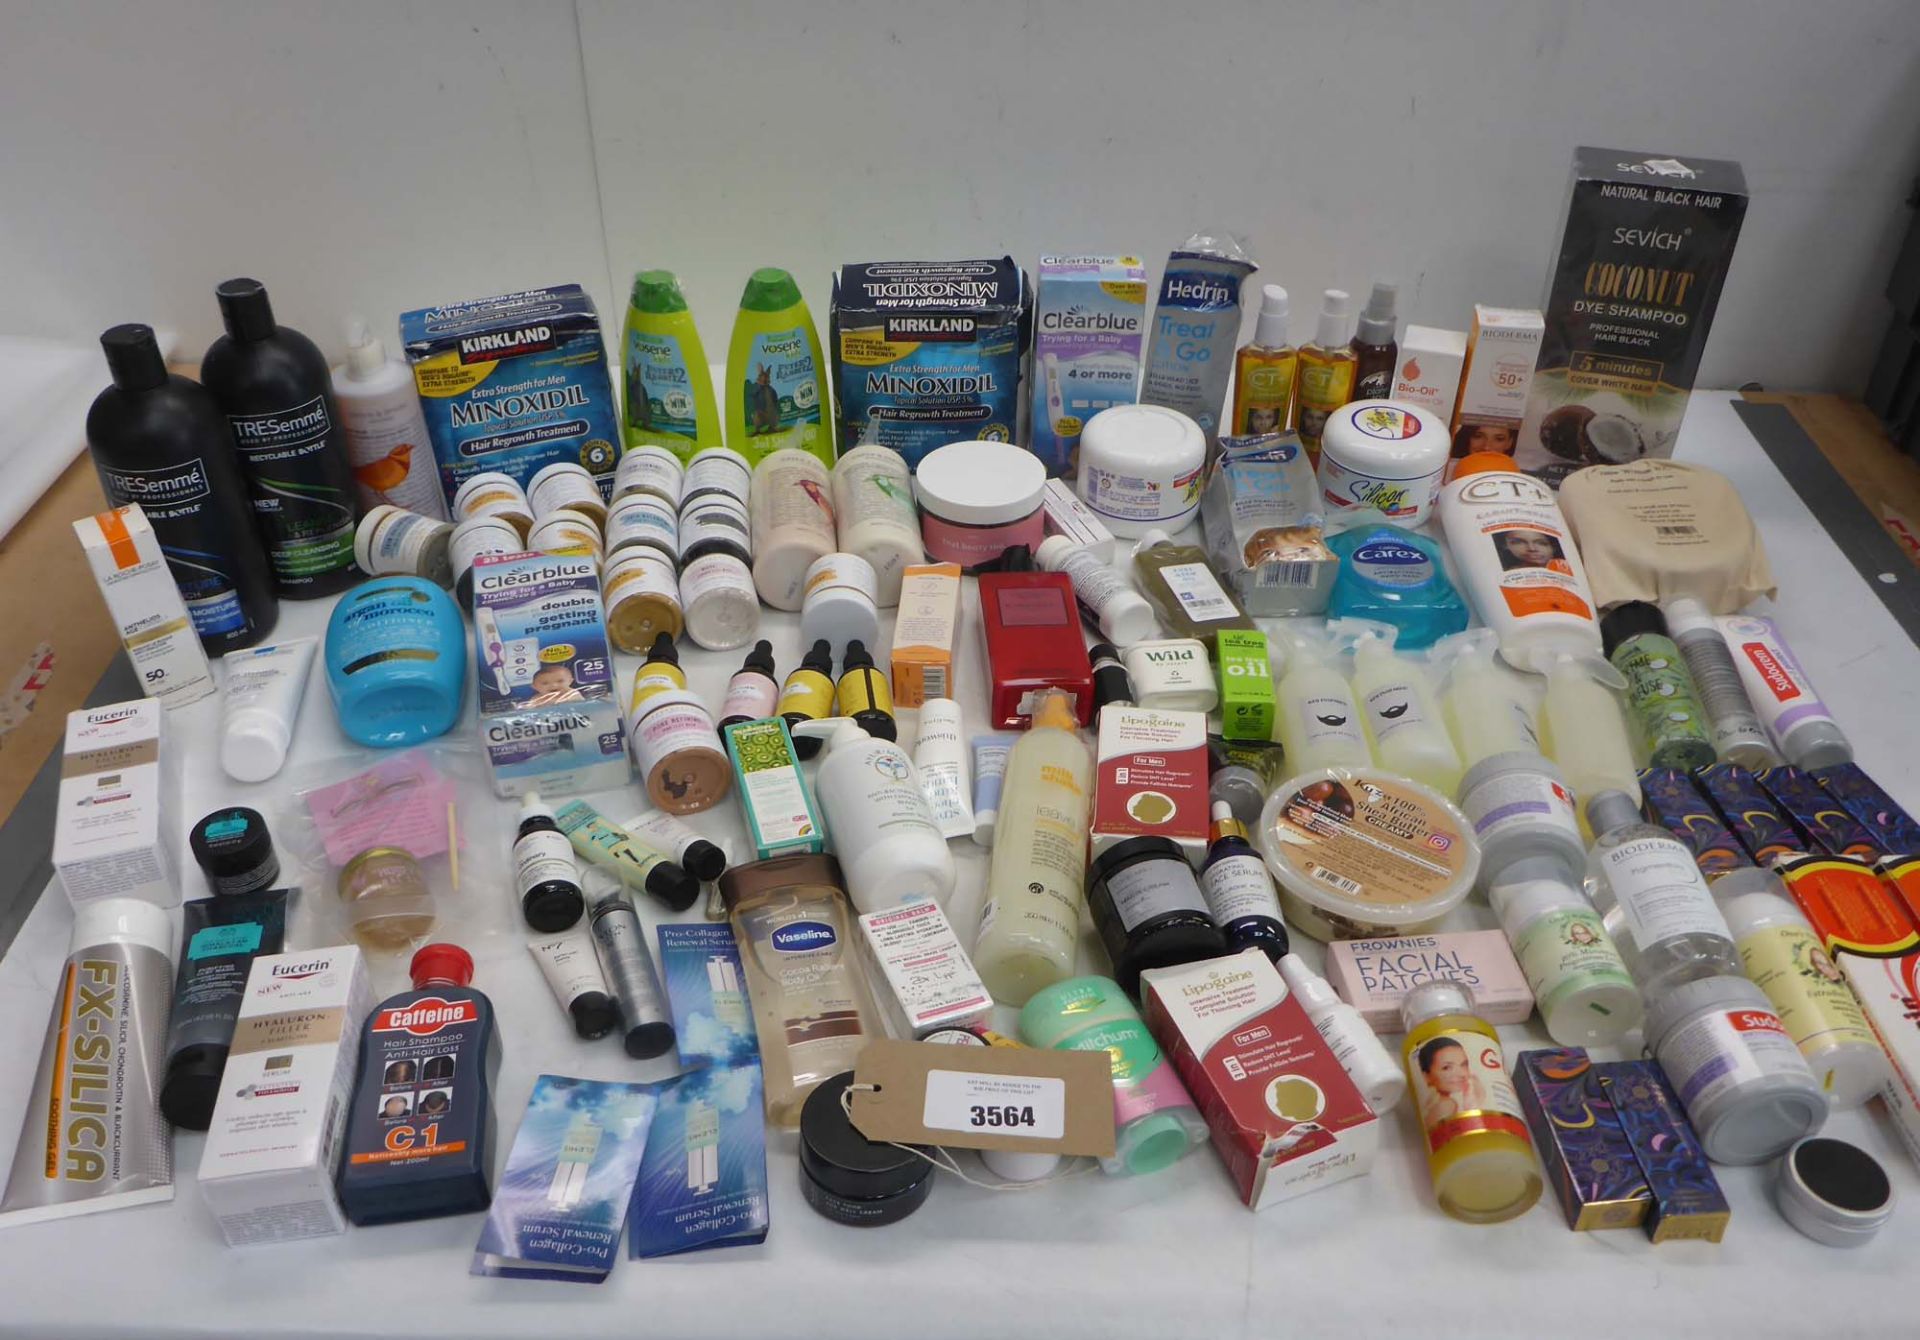 Large bag of toiletries including shampoo, cleanser, Clearblue, essential oils, age well creams,